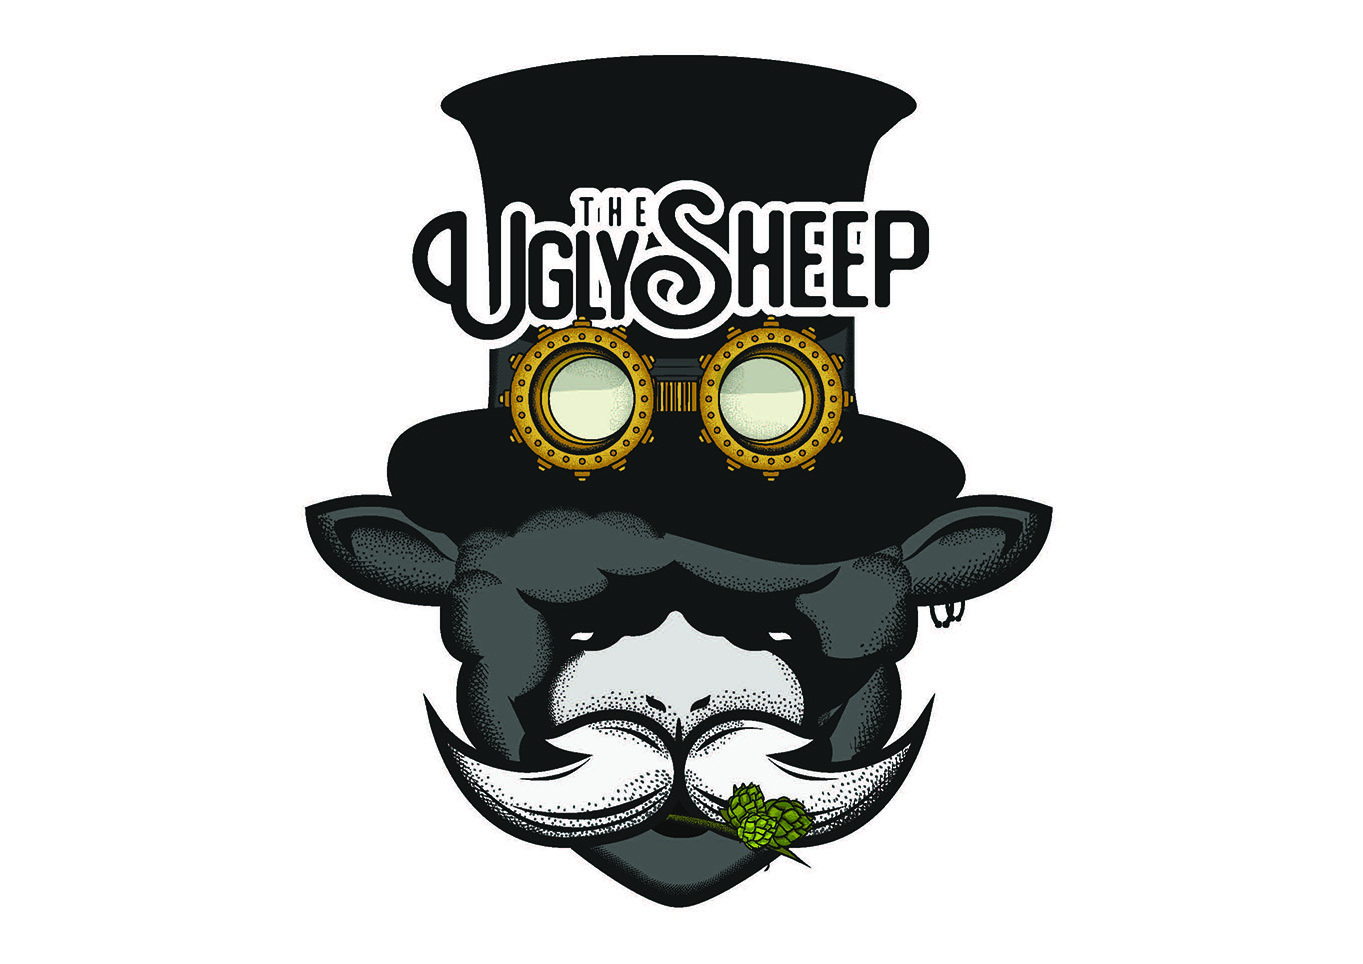 THE UGLY SHEEP BREWERY